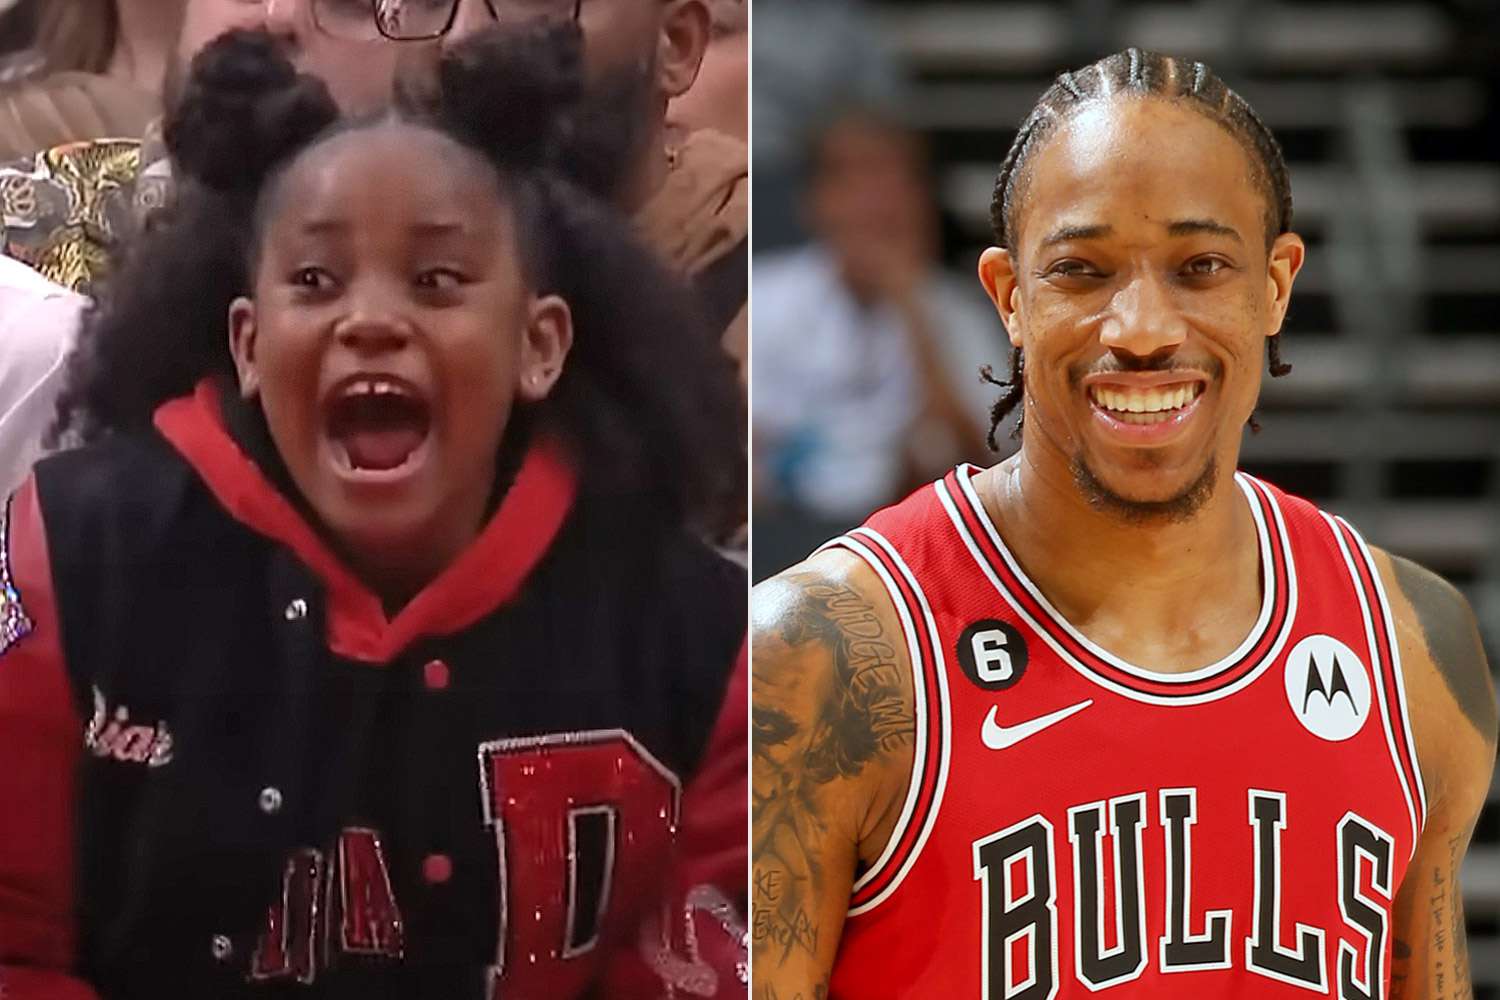 DeMar DeRozan's Daughter's Unconventional Support: Screaming at the Free Throw Line